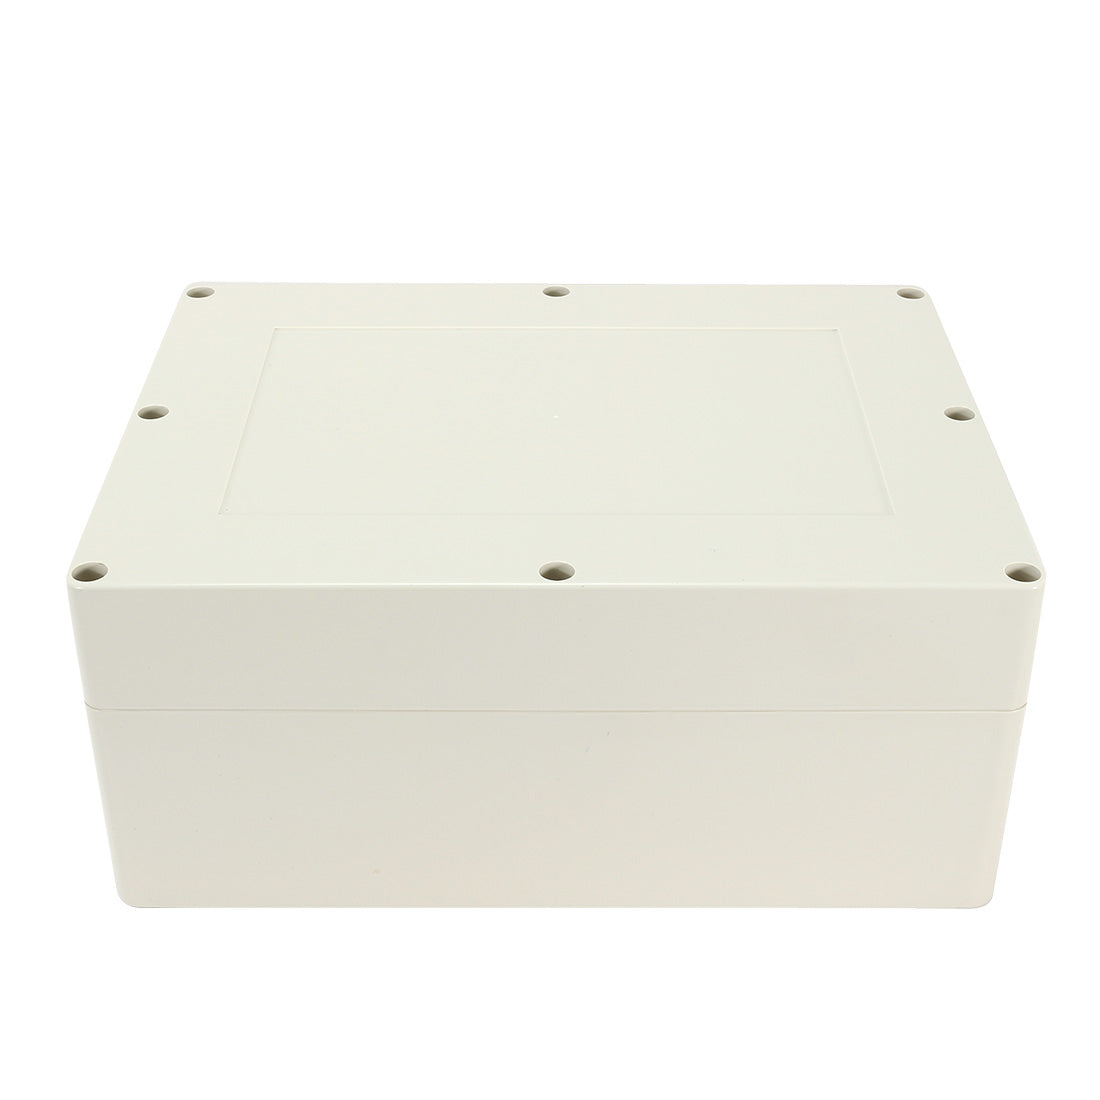 uxcell Uxcell 12.6"x9.5"x5.5"(320mmx240mmx140mm) ABS Junction Box Universal Electric Project Enclosure